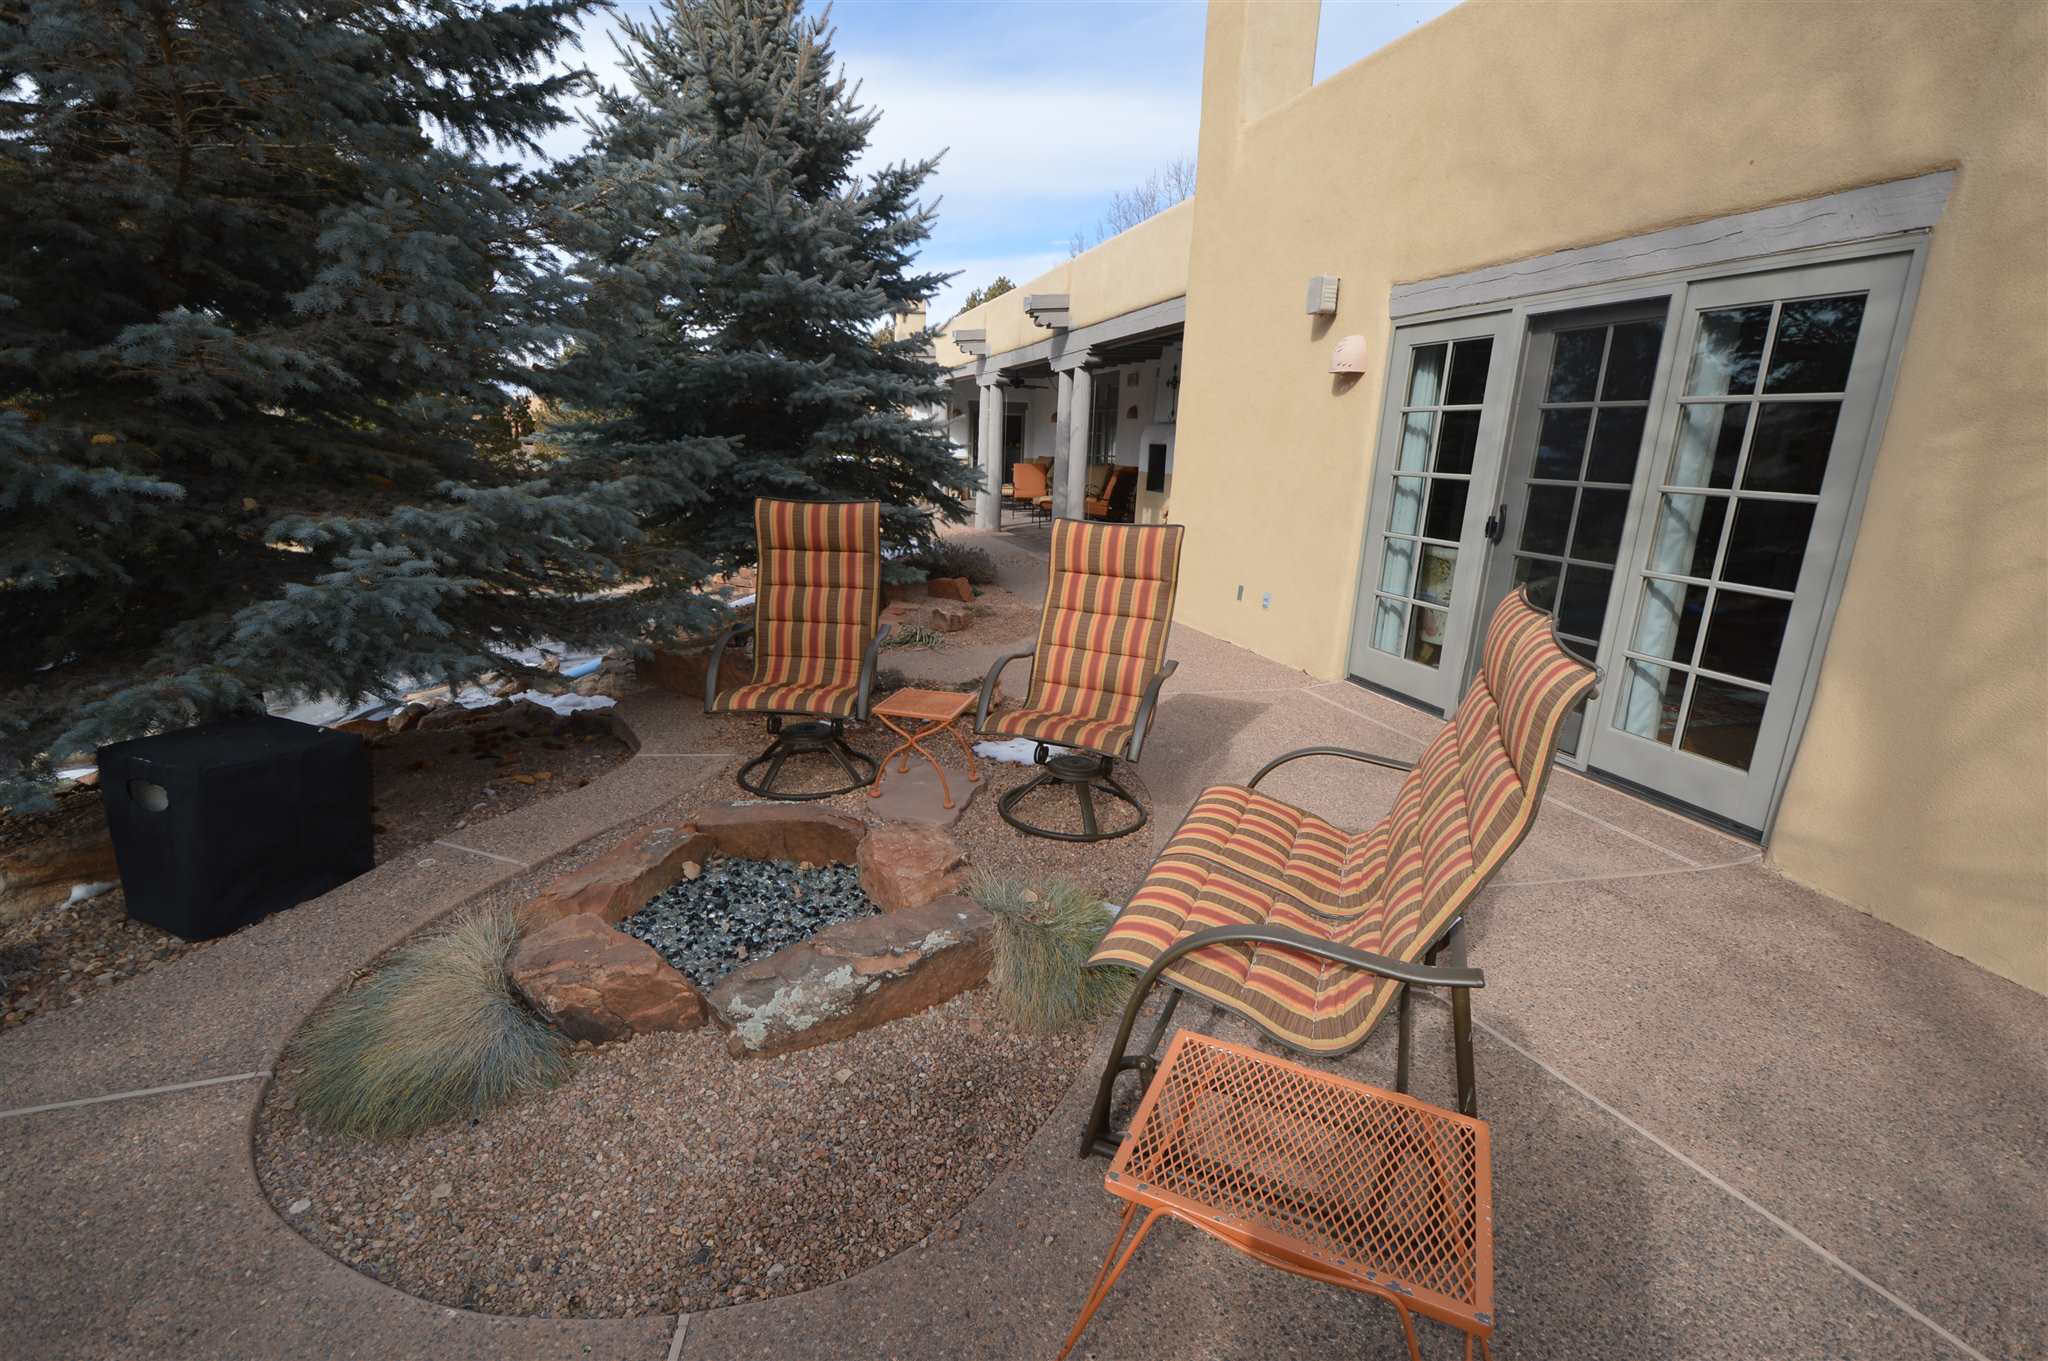 3101 Old Pecos Trail #612, Santa Fe, New Mexico 87505, 3 Bedrooms Bedrooms, ,4 BathroomsBathrooms,Residential,For Sale,3101 Old Pecos Trail #612,202100622